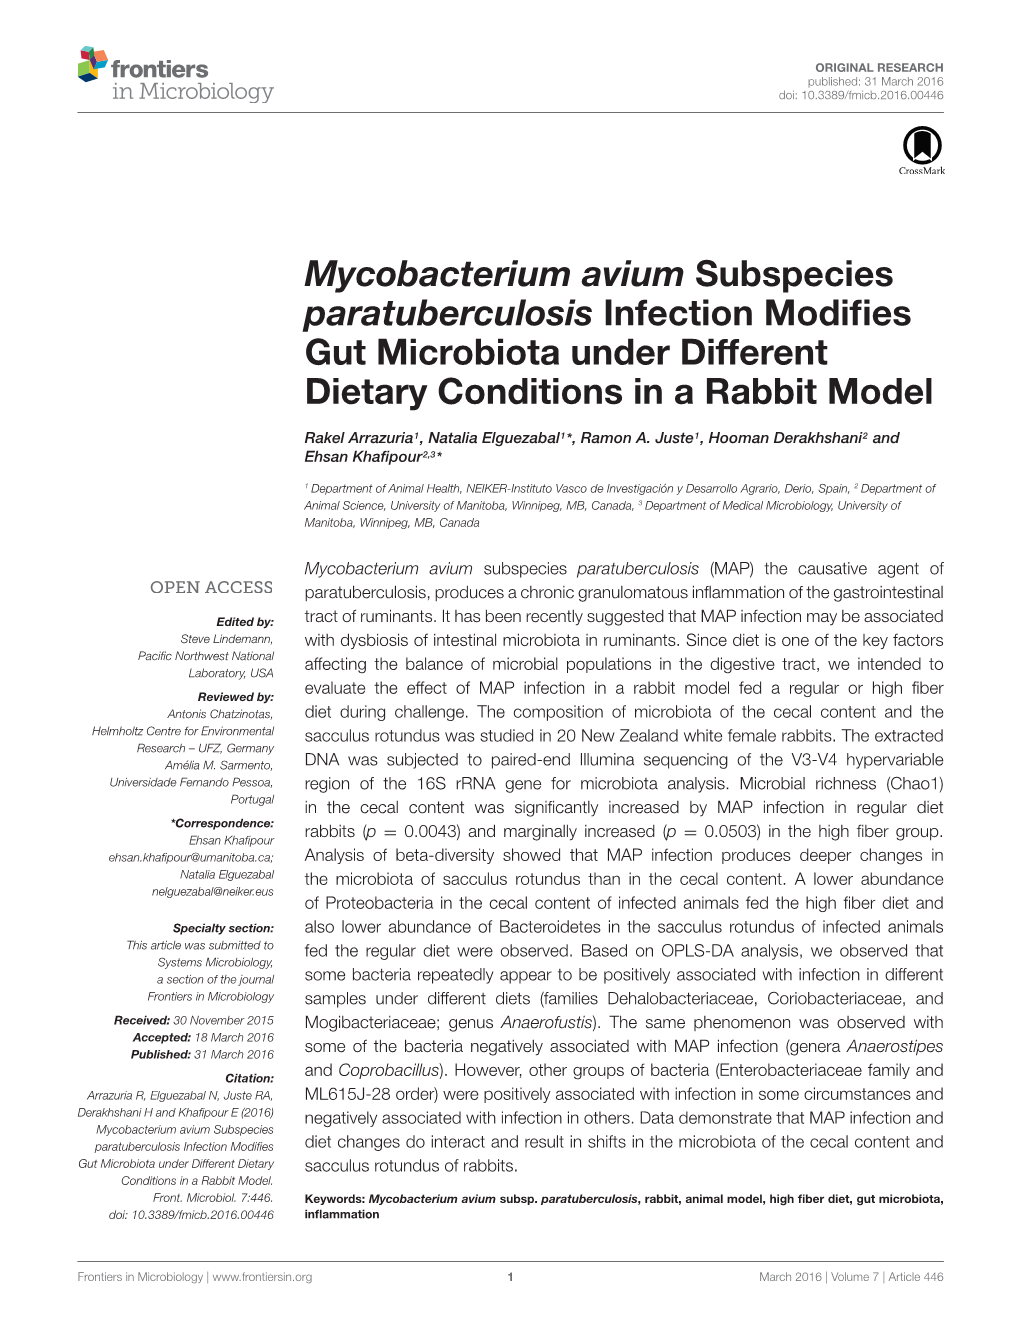 Mycobacterium Avium Subspecies Paratuberculosis Infection Modifies Gut Microbiota Under Different Dietary Conditions in a Rabbit